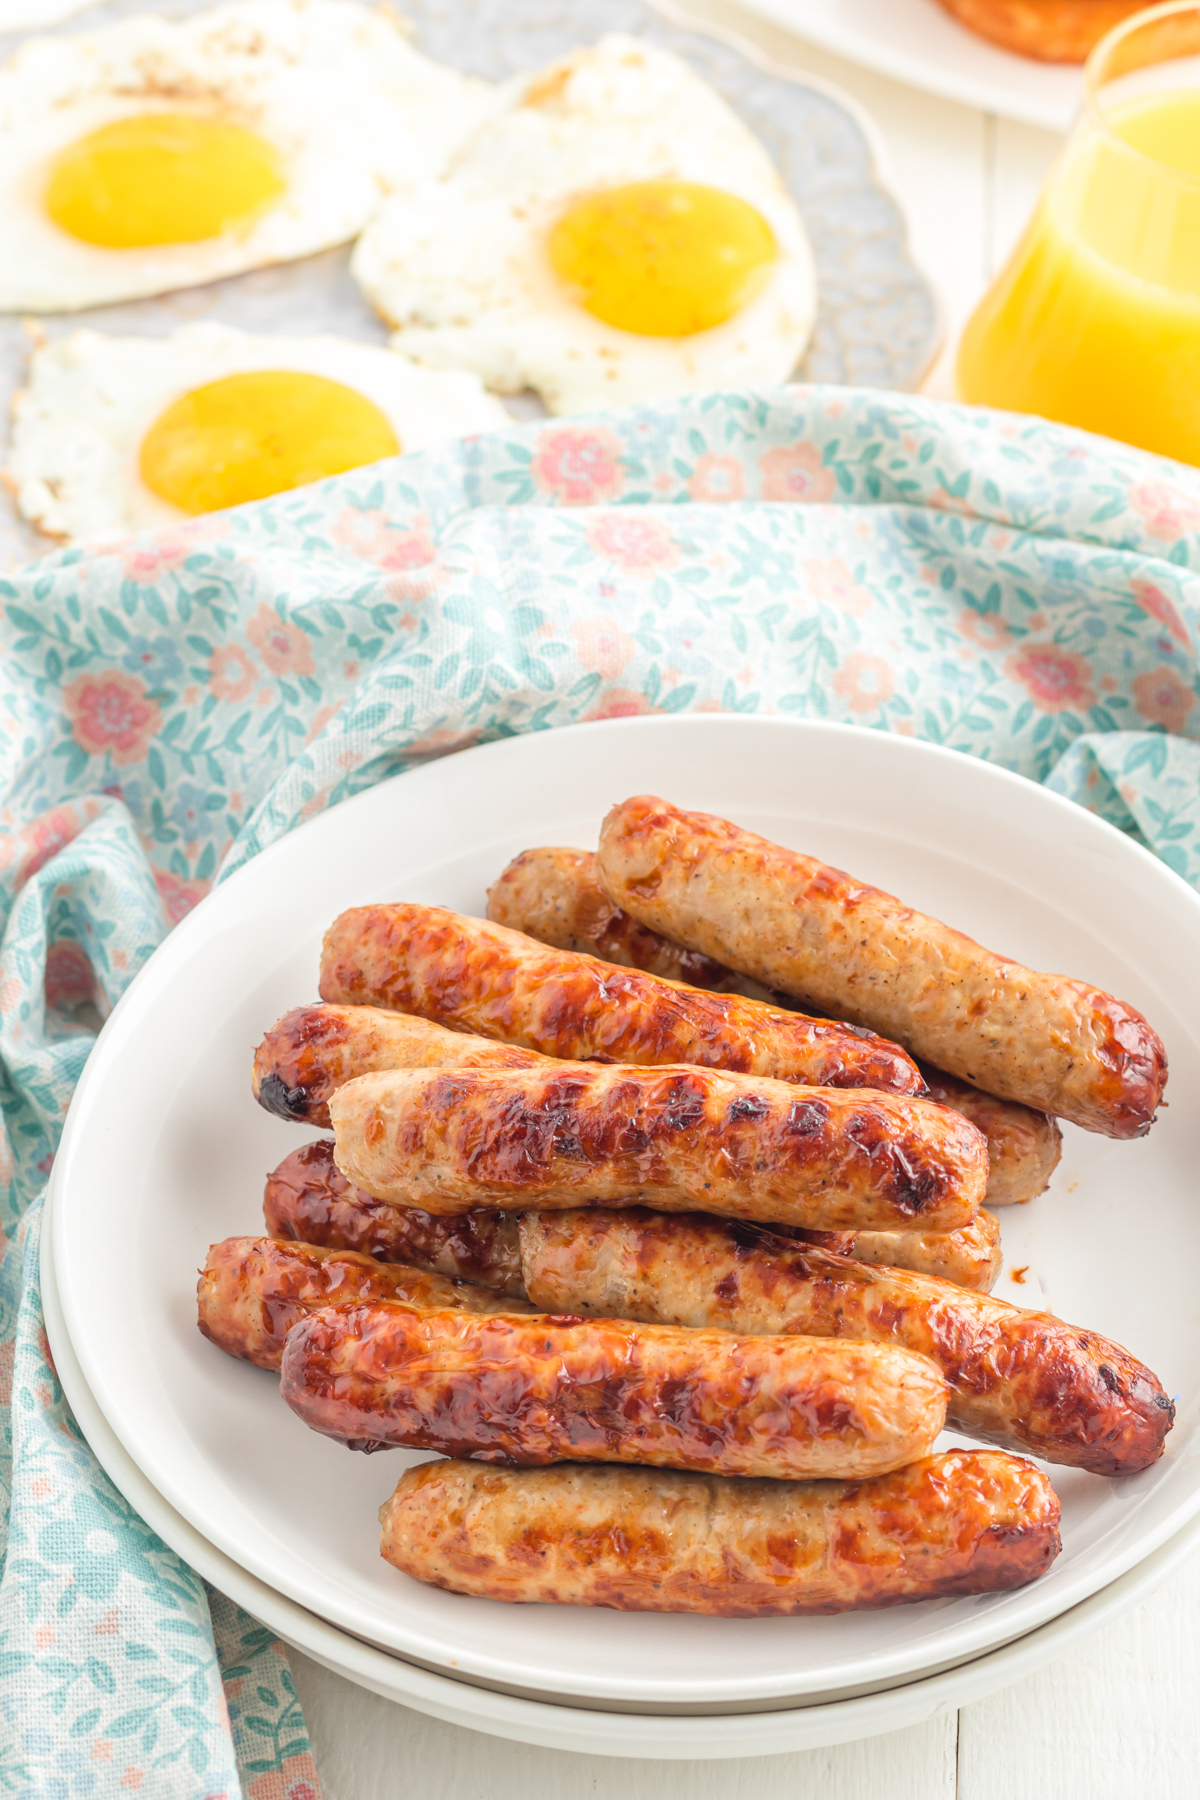 Sausages on a plate on table with eggs and juice.